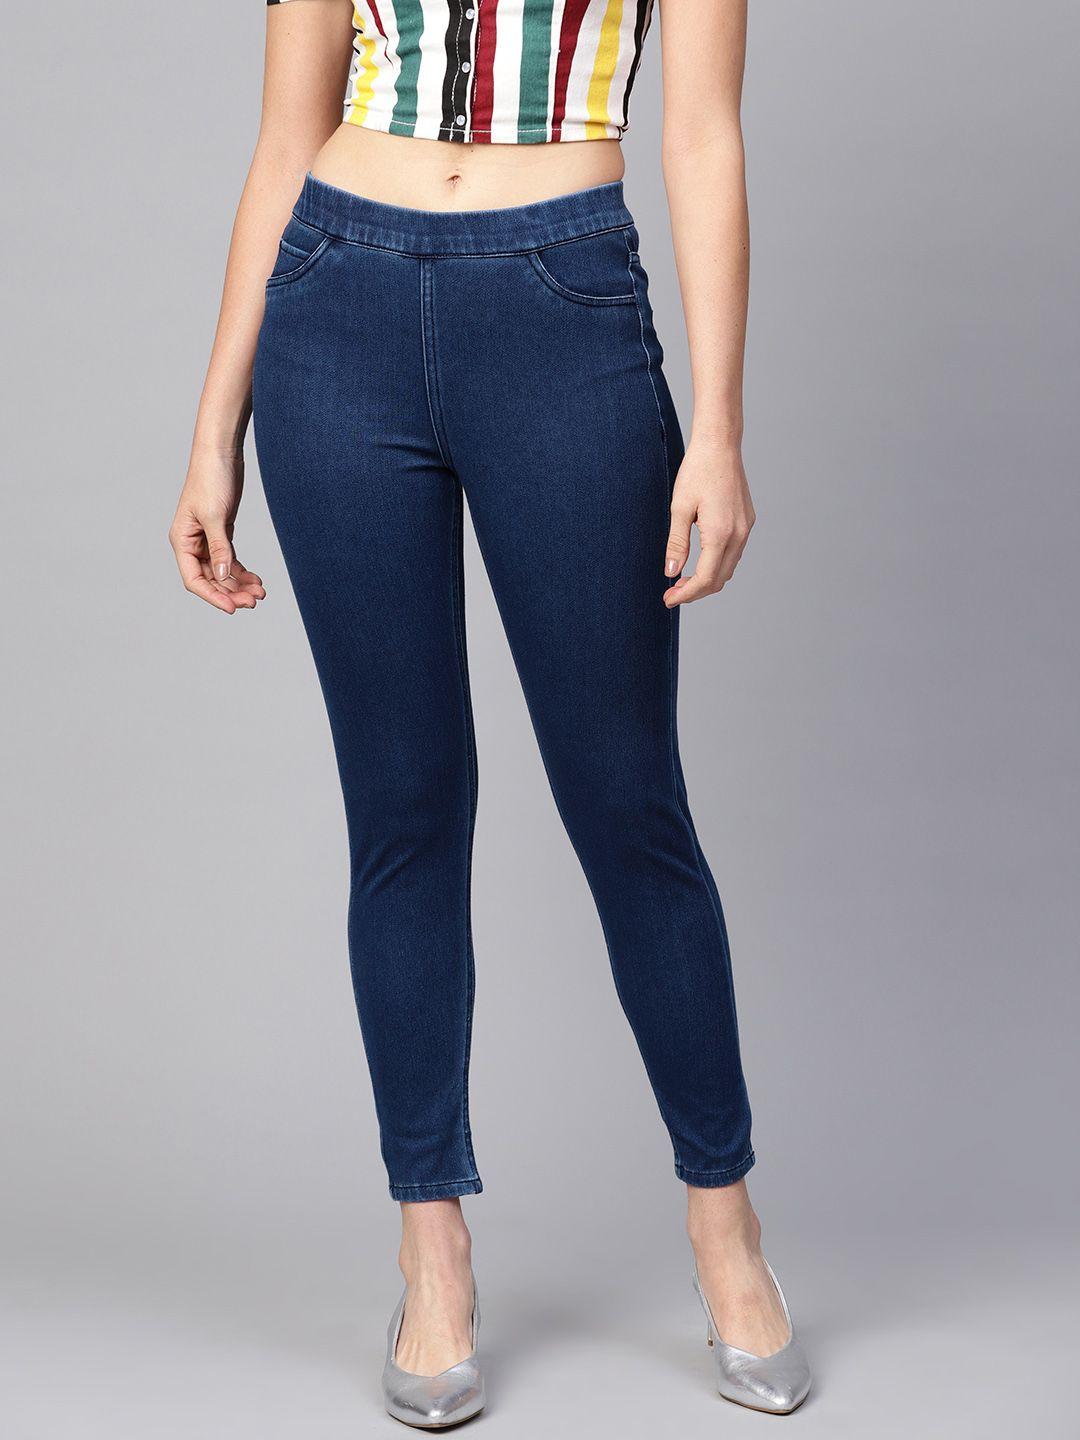 W Women Navy Blue Solid Cropped Jeggings